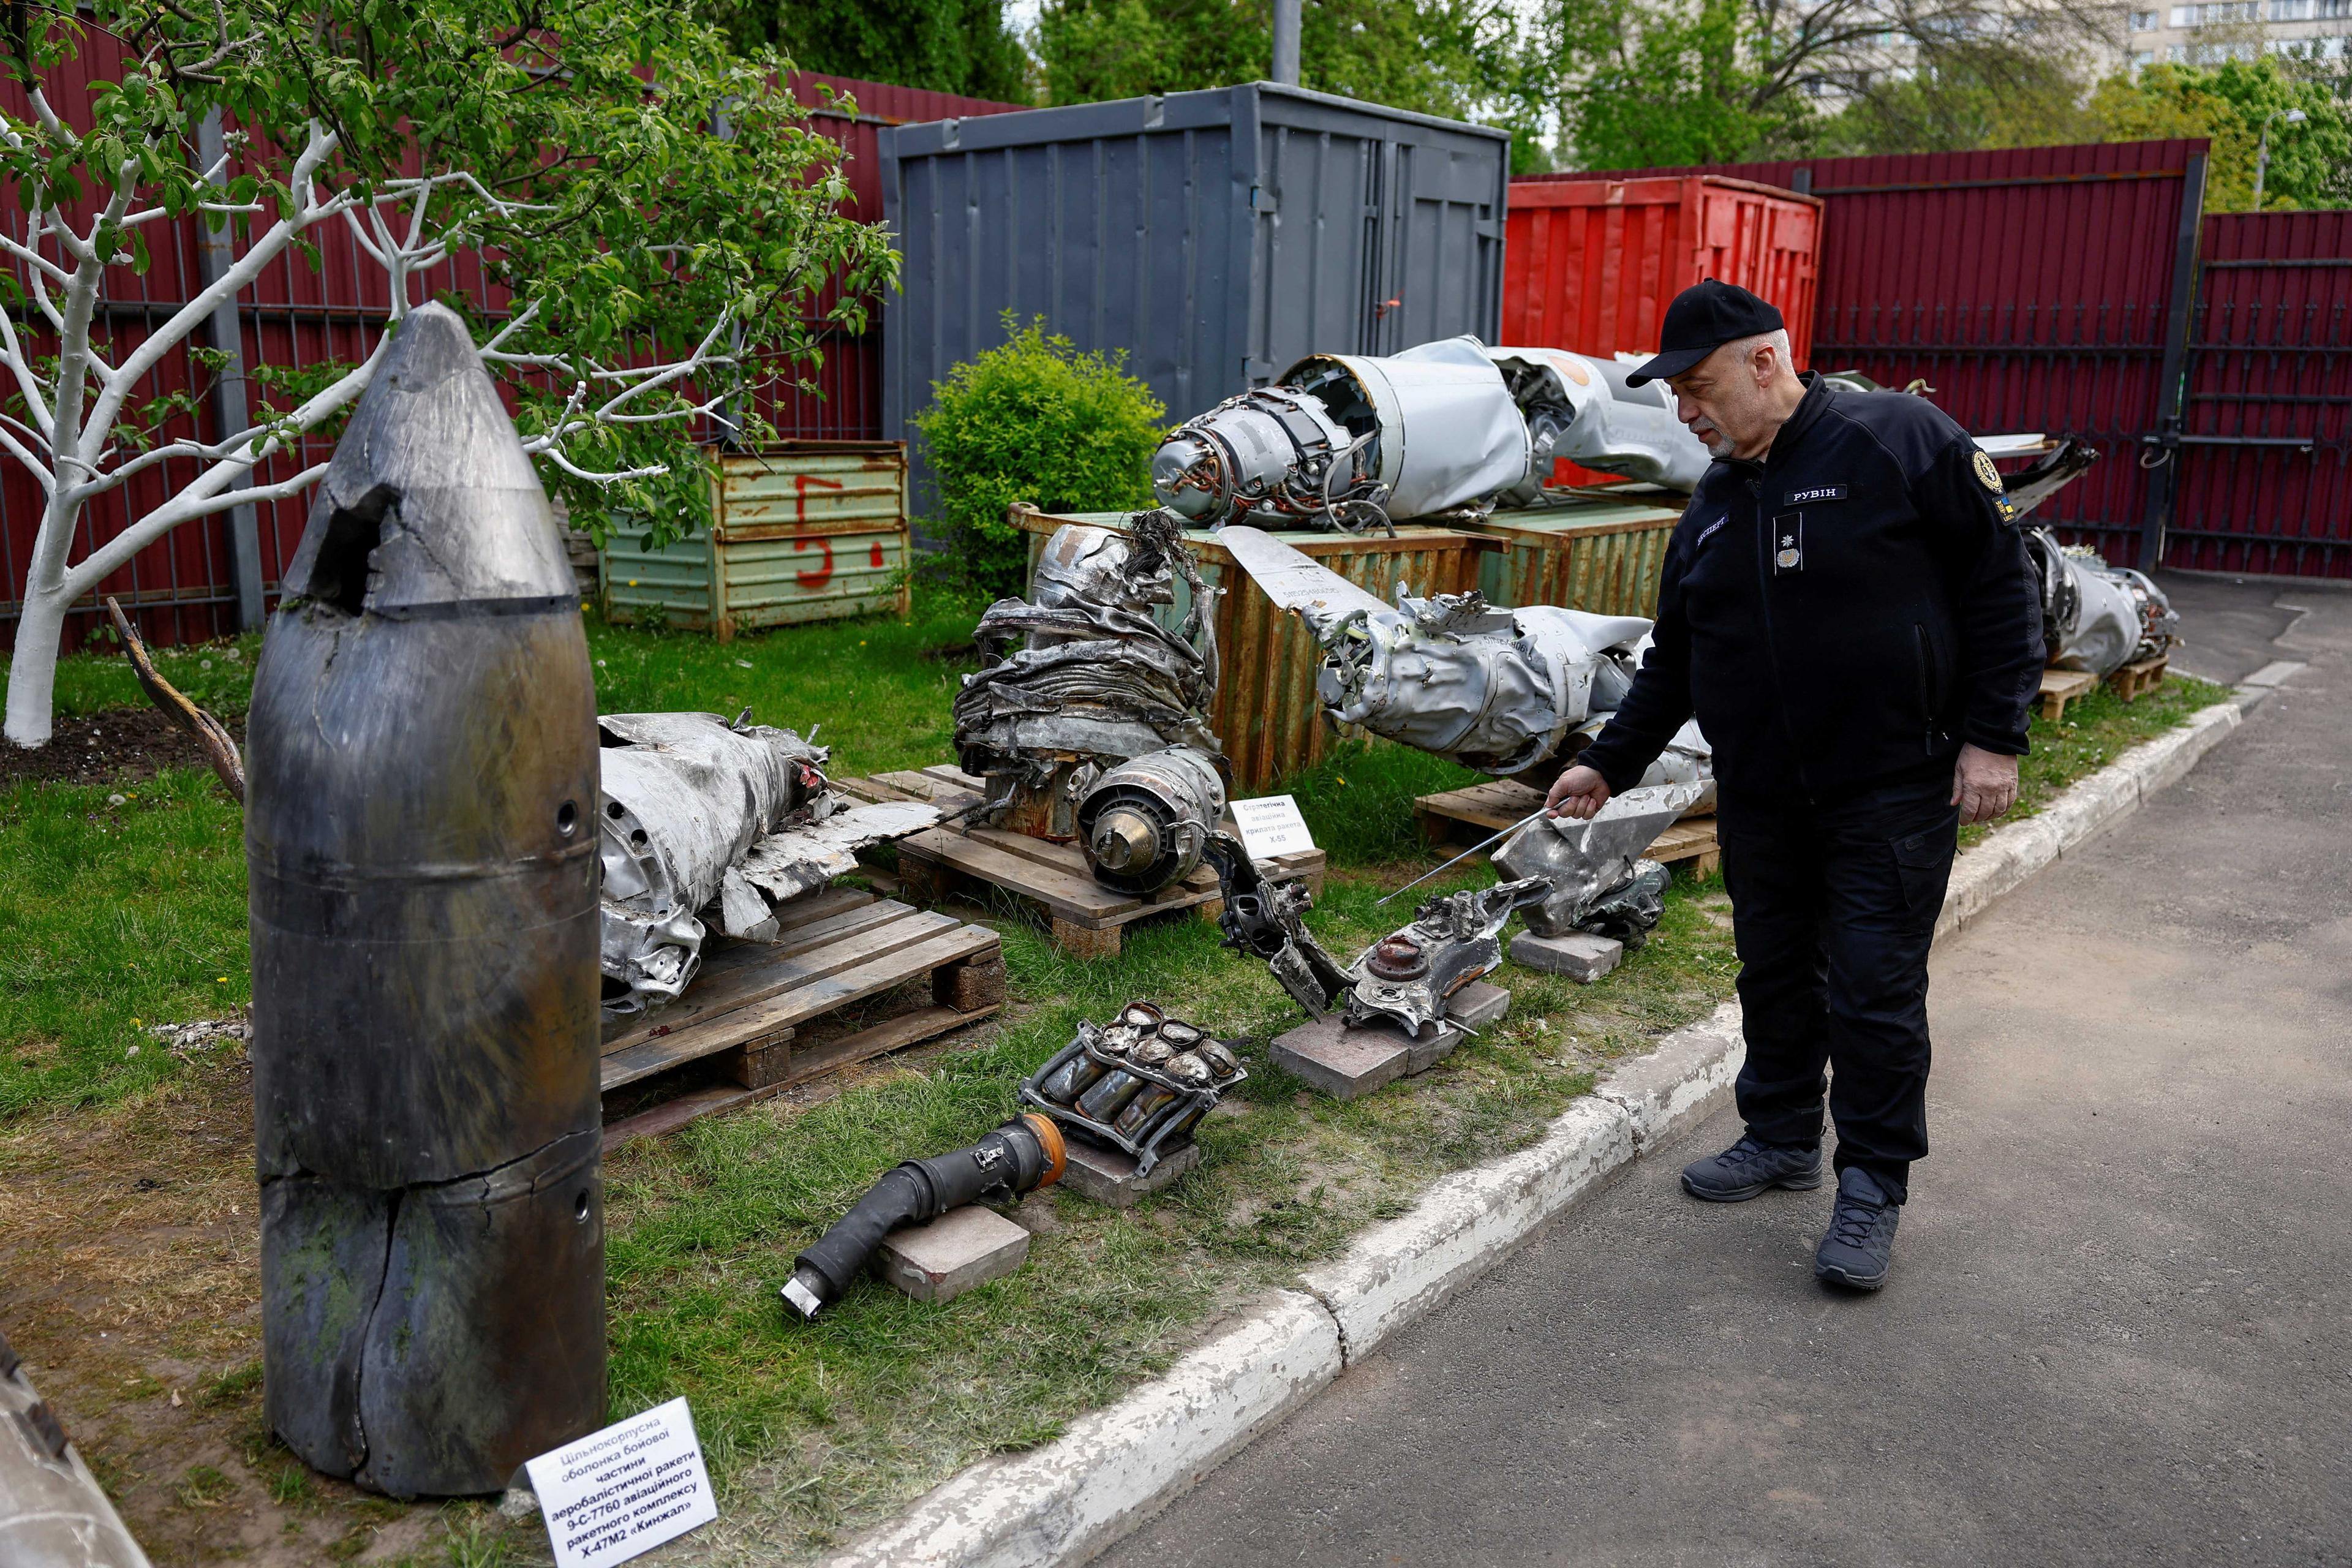 Oleksandr Ruvin, director of the Kyiv Scientific Research Institute of Forensic Expertise, shows Kh-47 Kinzhal Russian hypersonic missile parts, shot down by a Ukrainian Air Defence unit amid Russia's attack on Ukraine, Kyiv, Ukraine May 12. Photo: Reuters